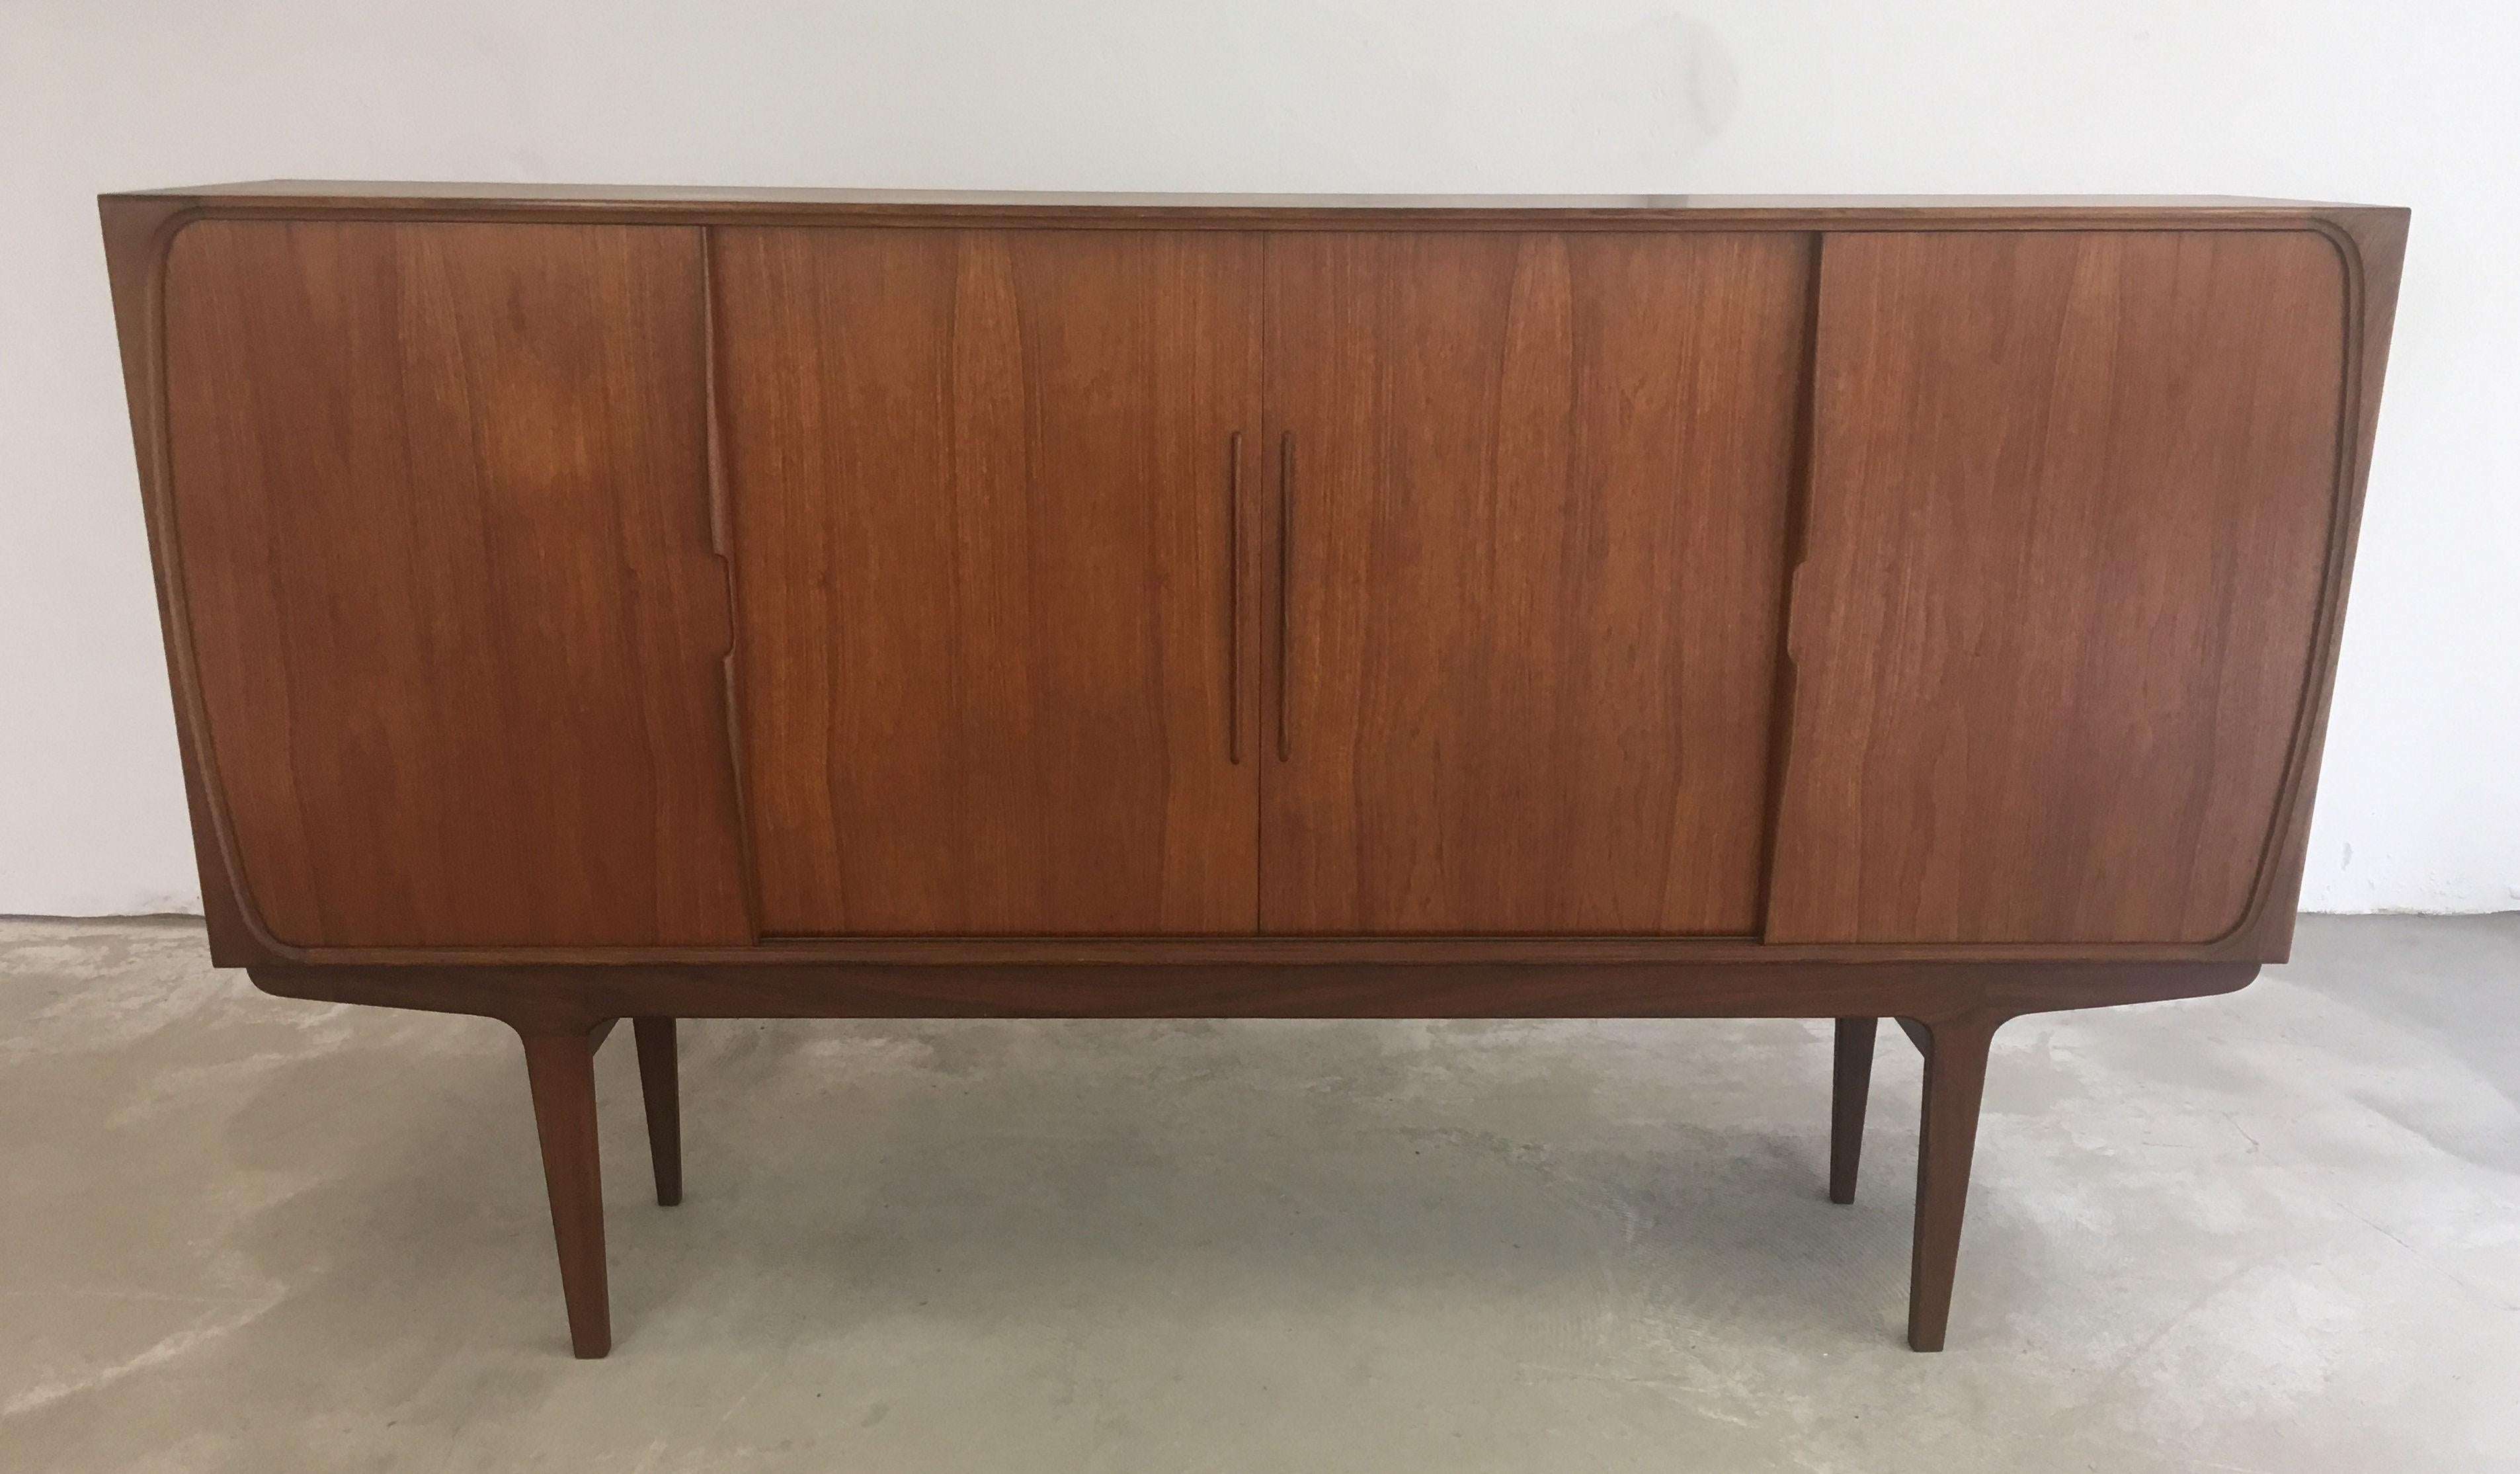 Danish sideboard in teak from the 1960s with an integrated bar section.

The well-shaped and well-crafted sideboard is in good vintage condition.

We are shipping our pieces by sea, air and land to most of the world on regular basis and will be